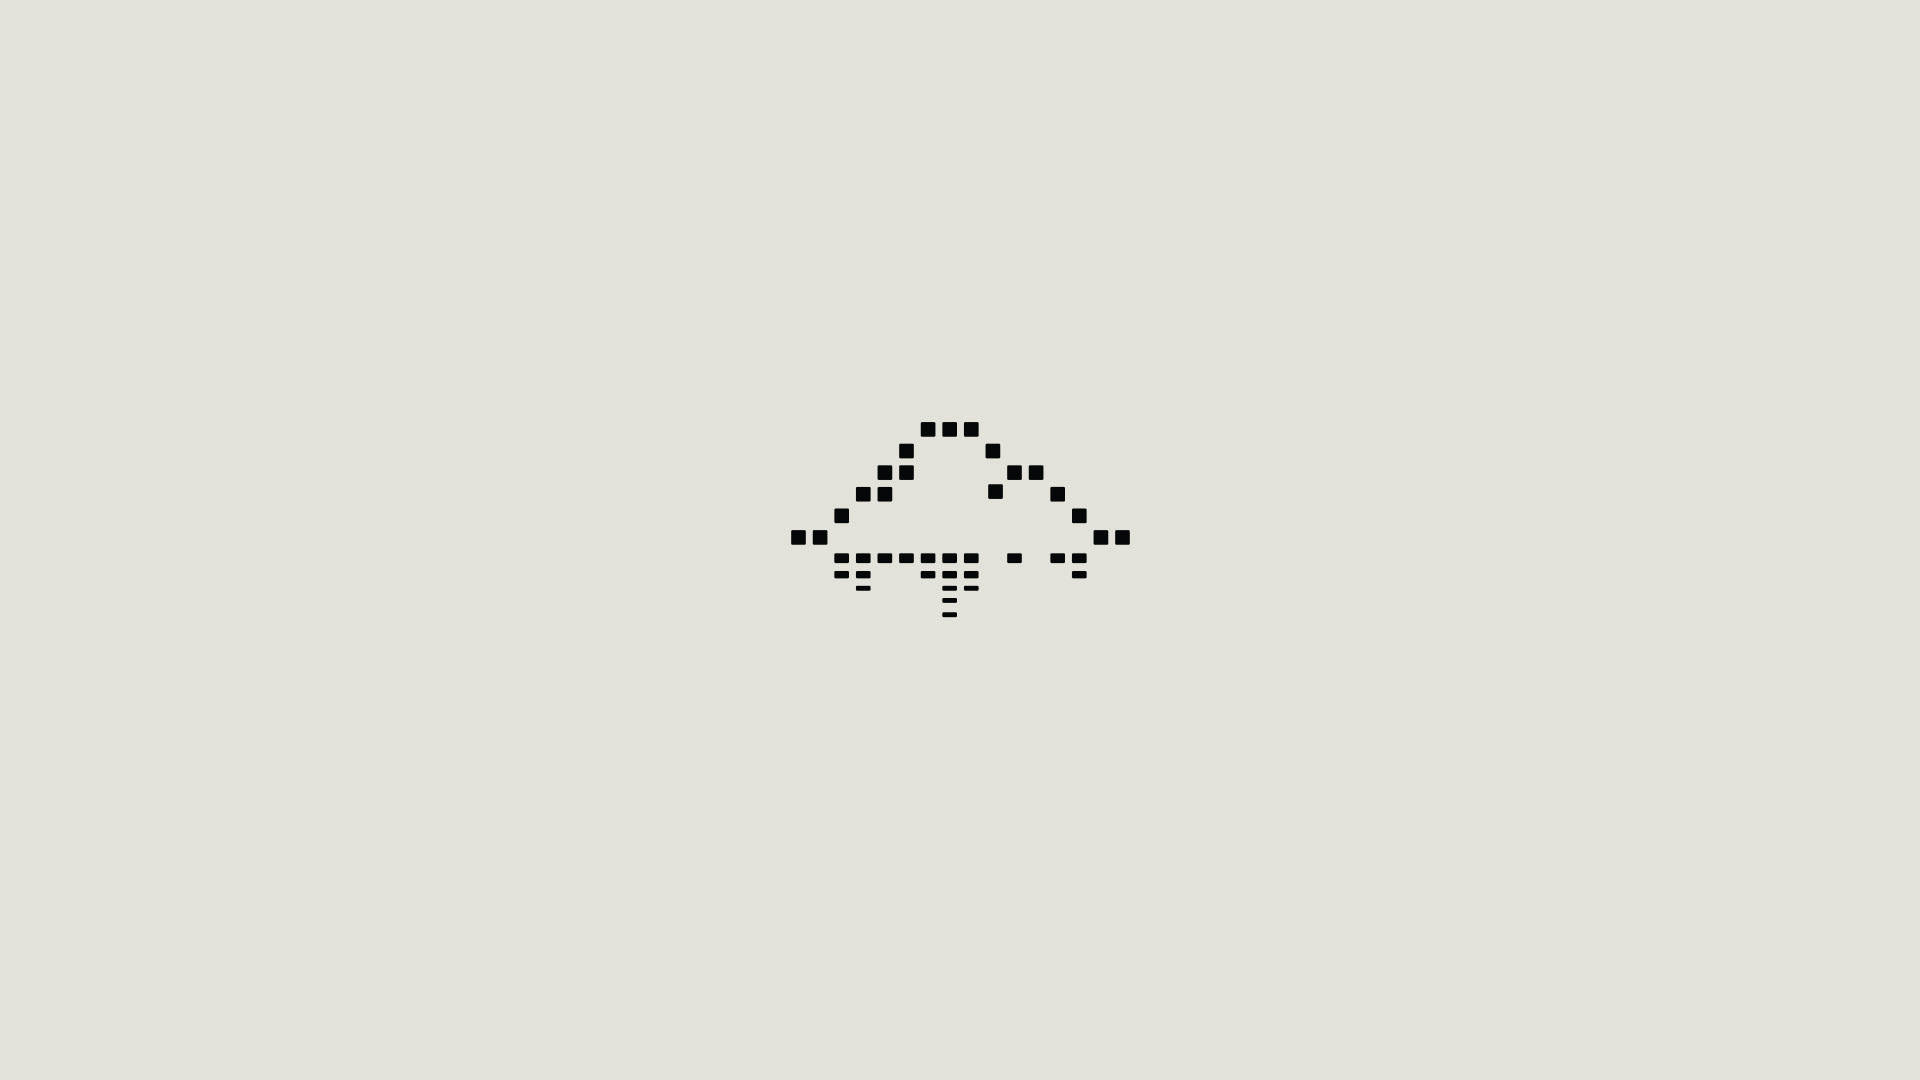 A triangle with dots on it - Minimalist